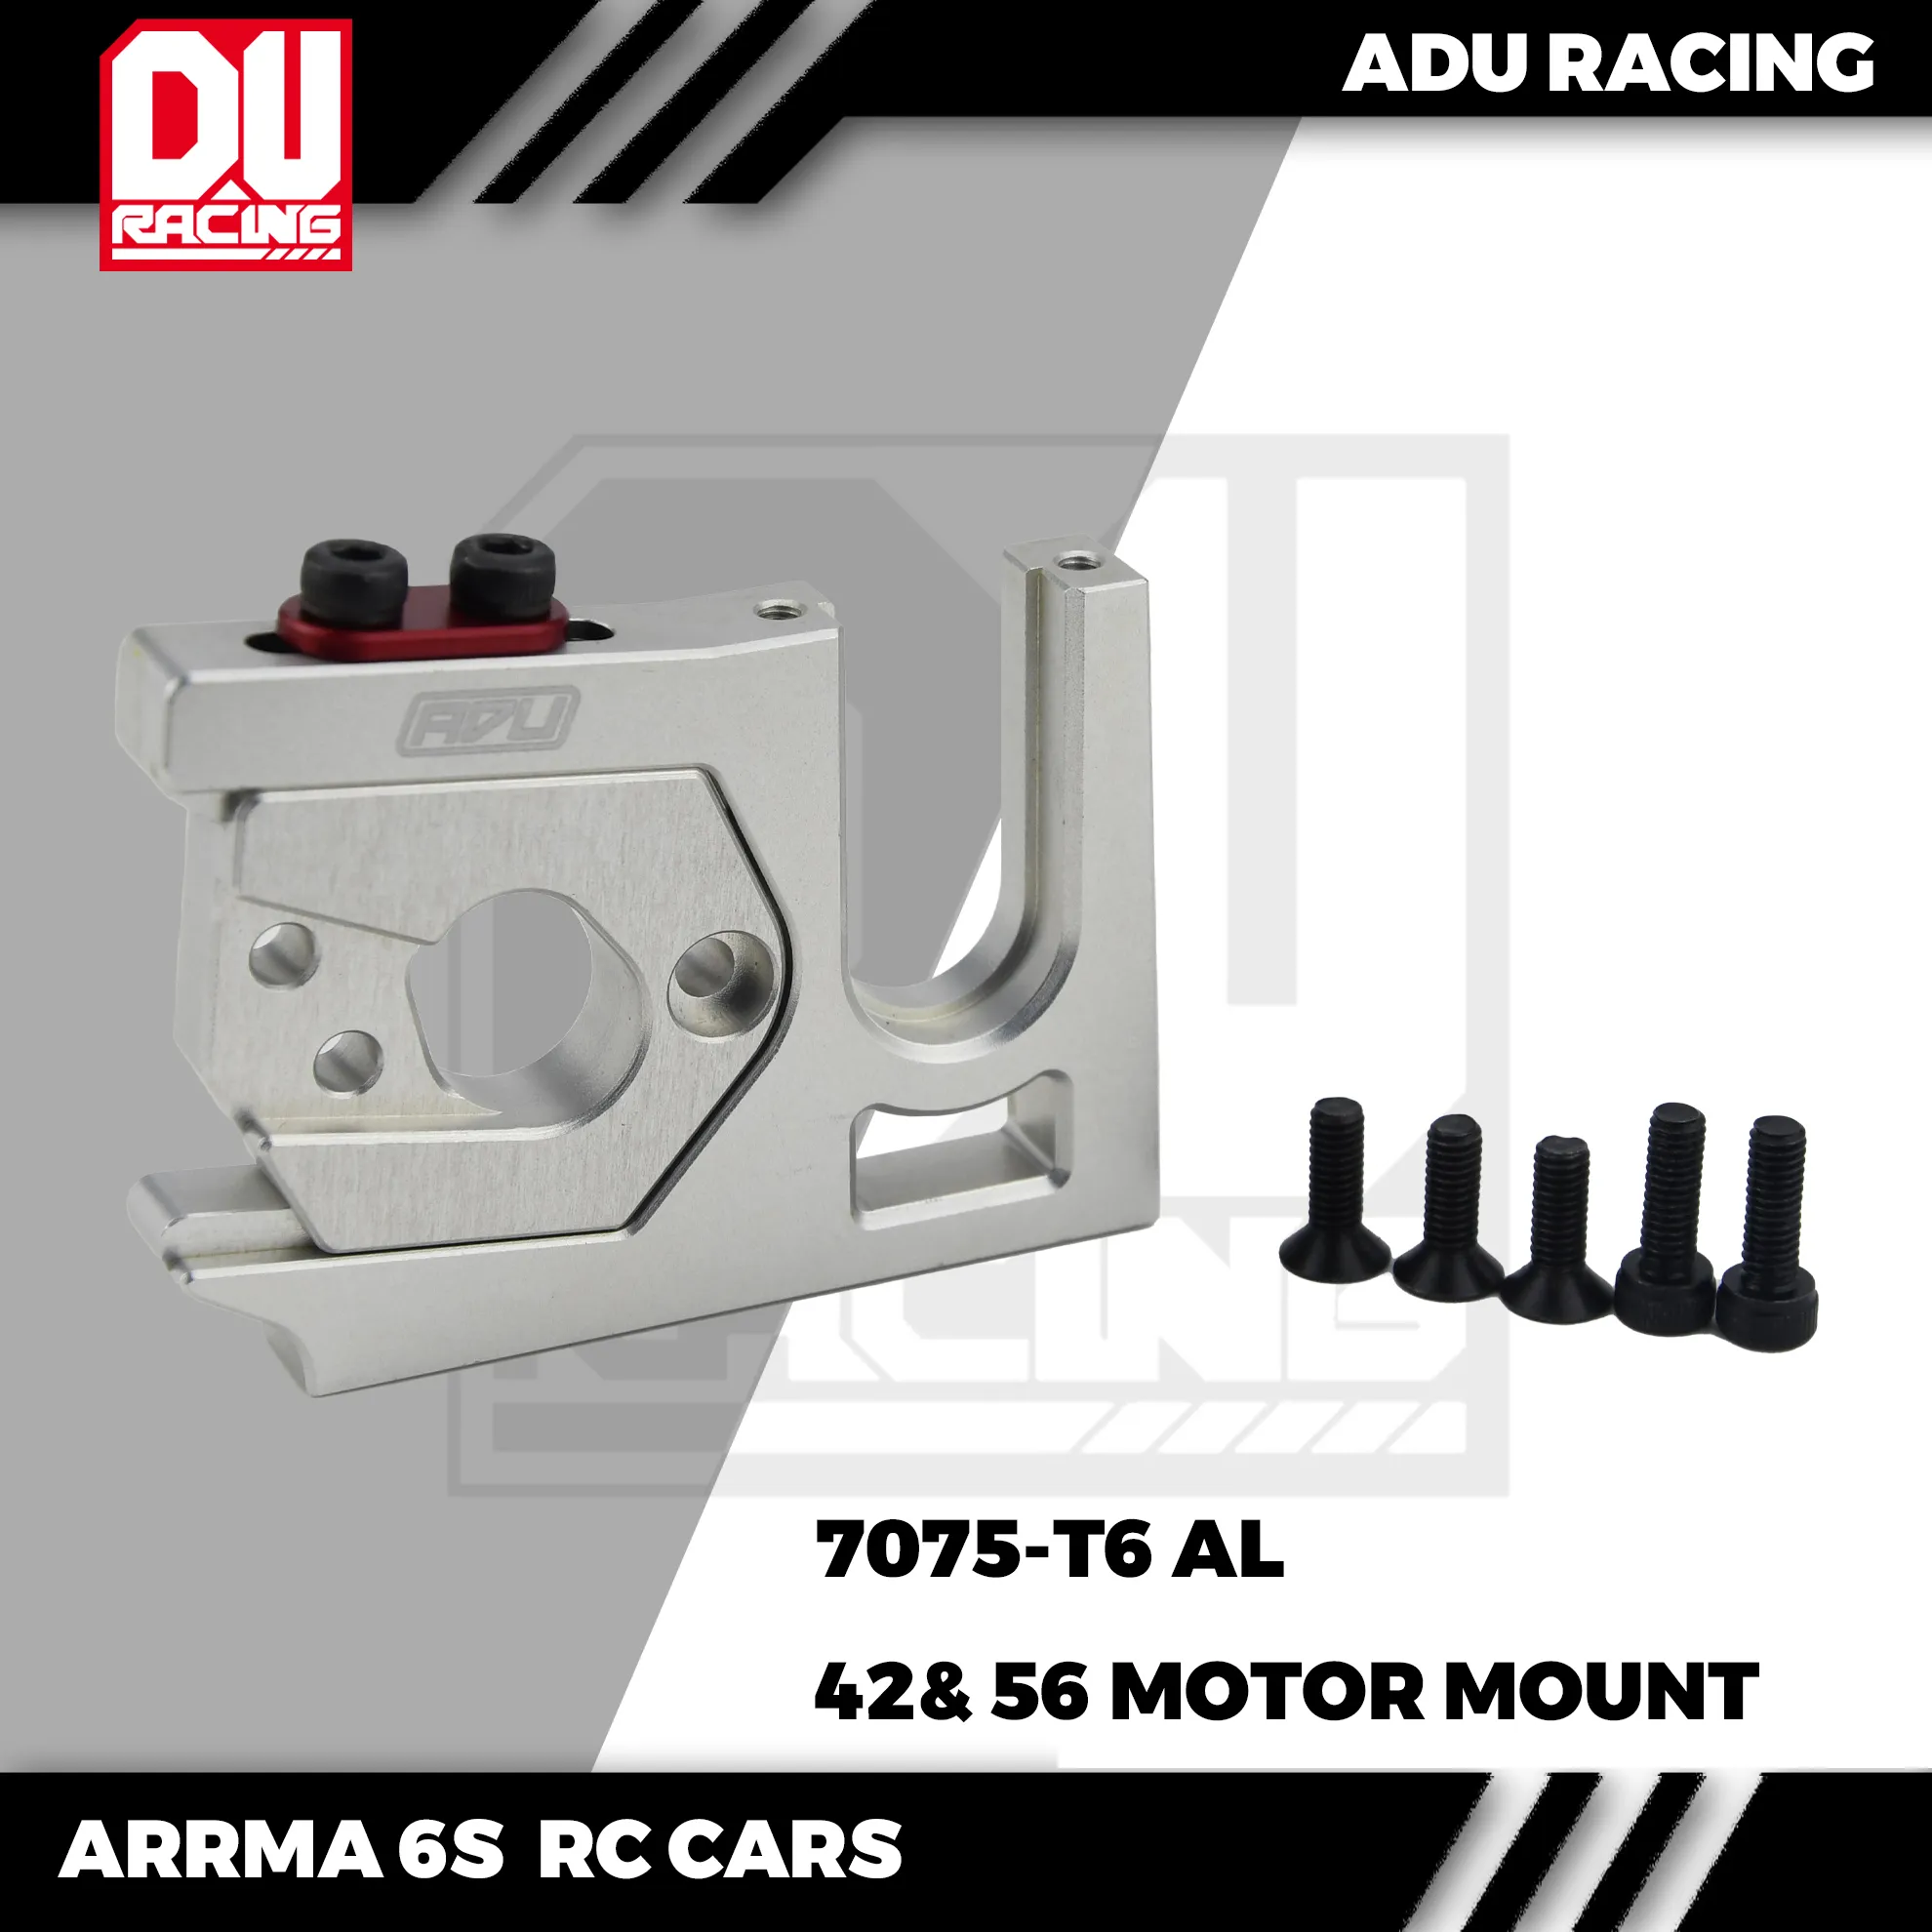 

ADU RACING 7075-T6 SLIDING MOTOR MOUNT WITH 42mm 49mm 56mm motor FOR ARRMA 6S 1/8 AND 1/7 RC CARS